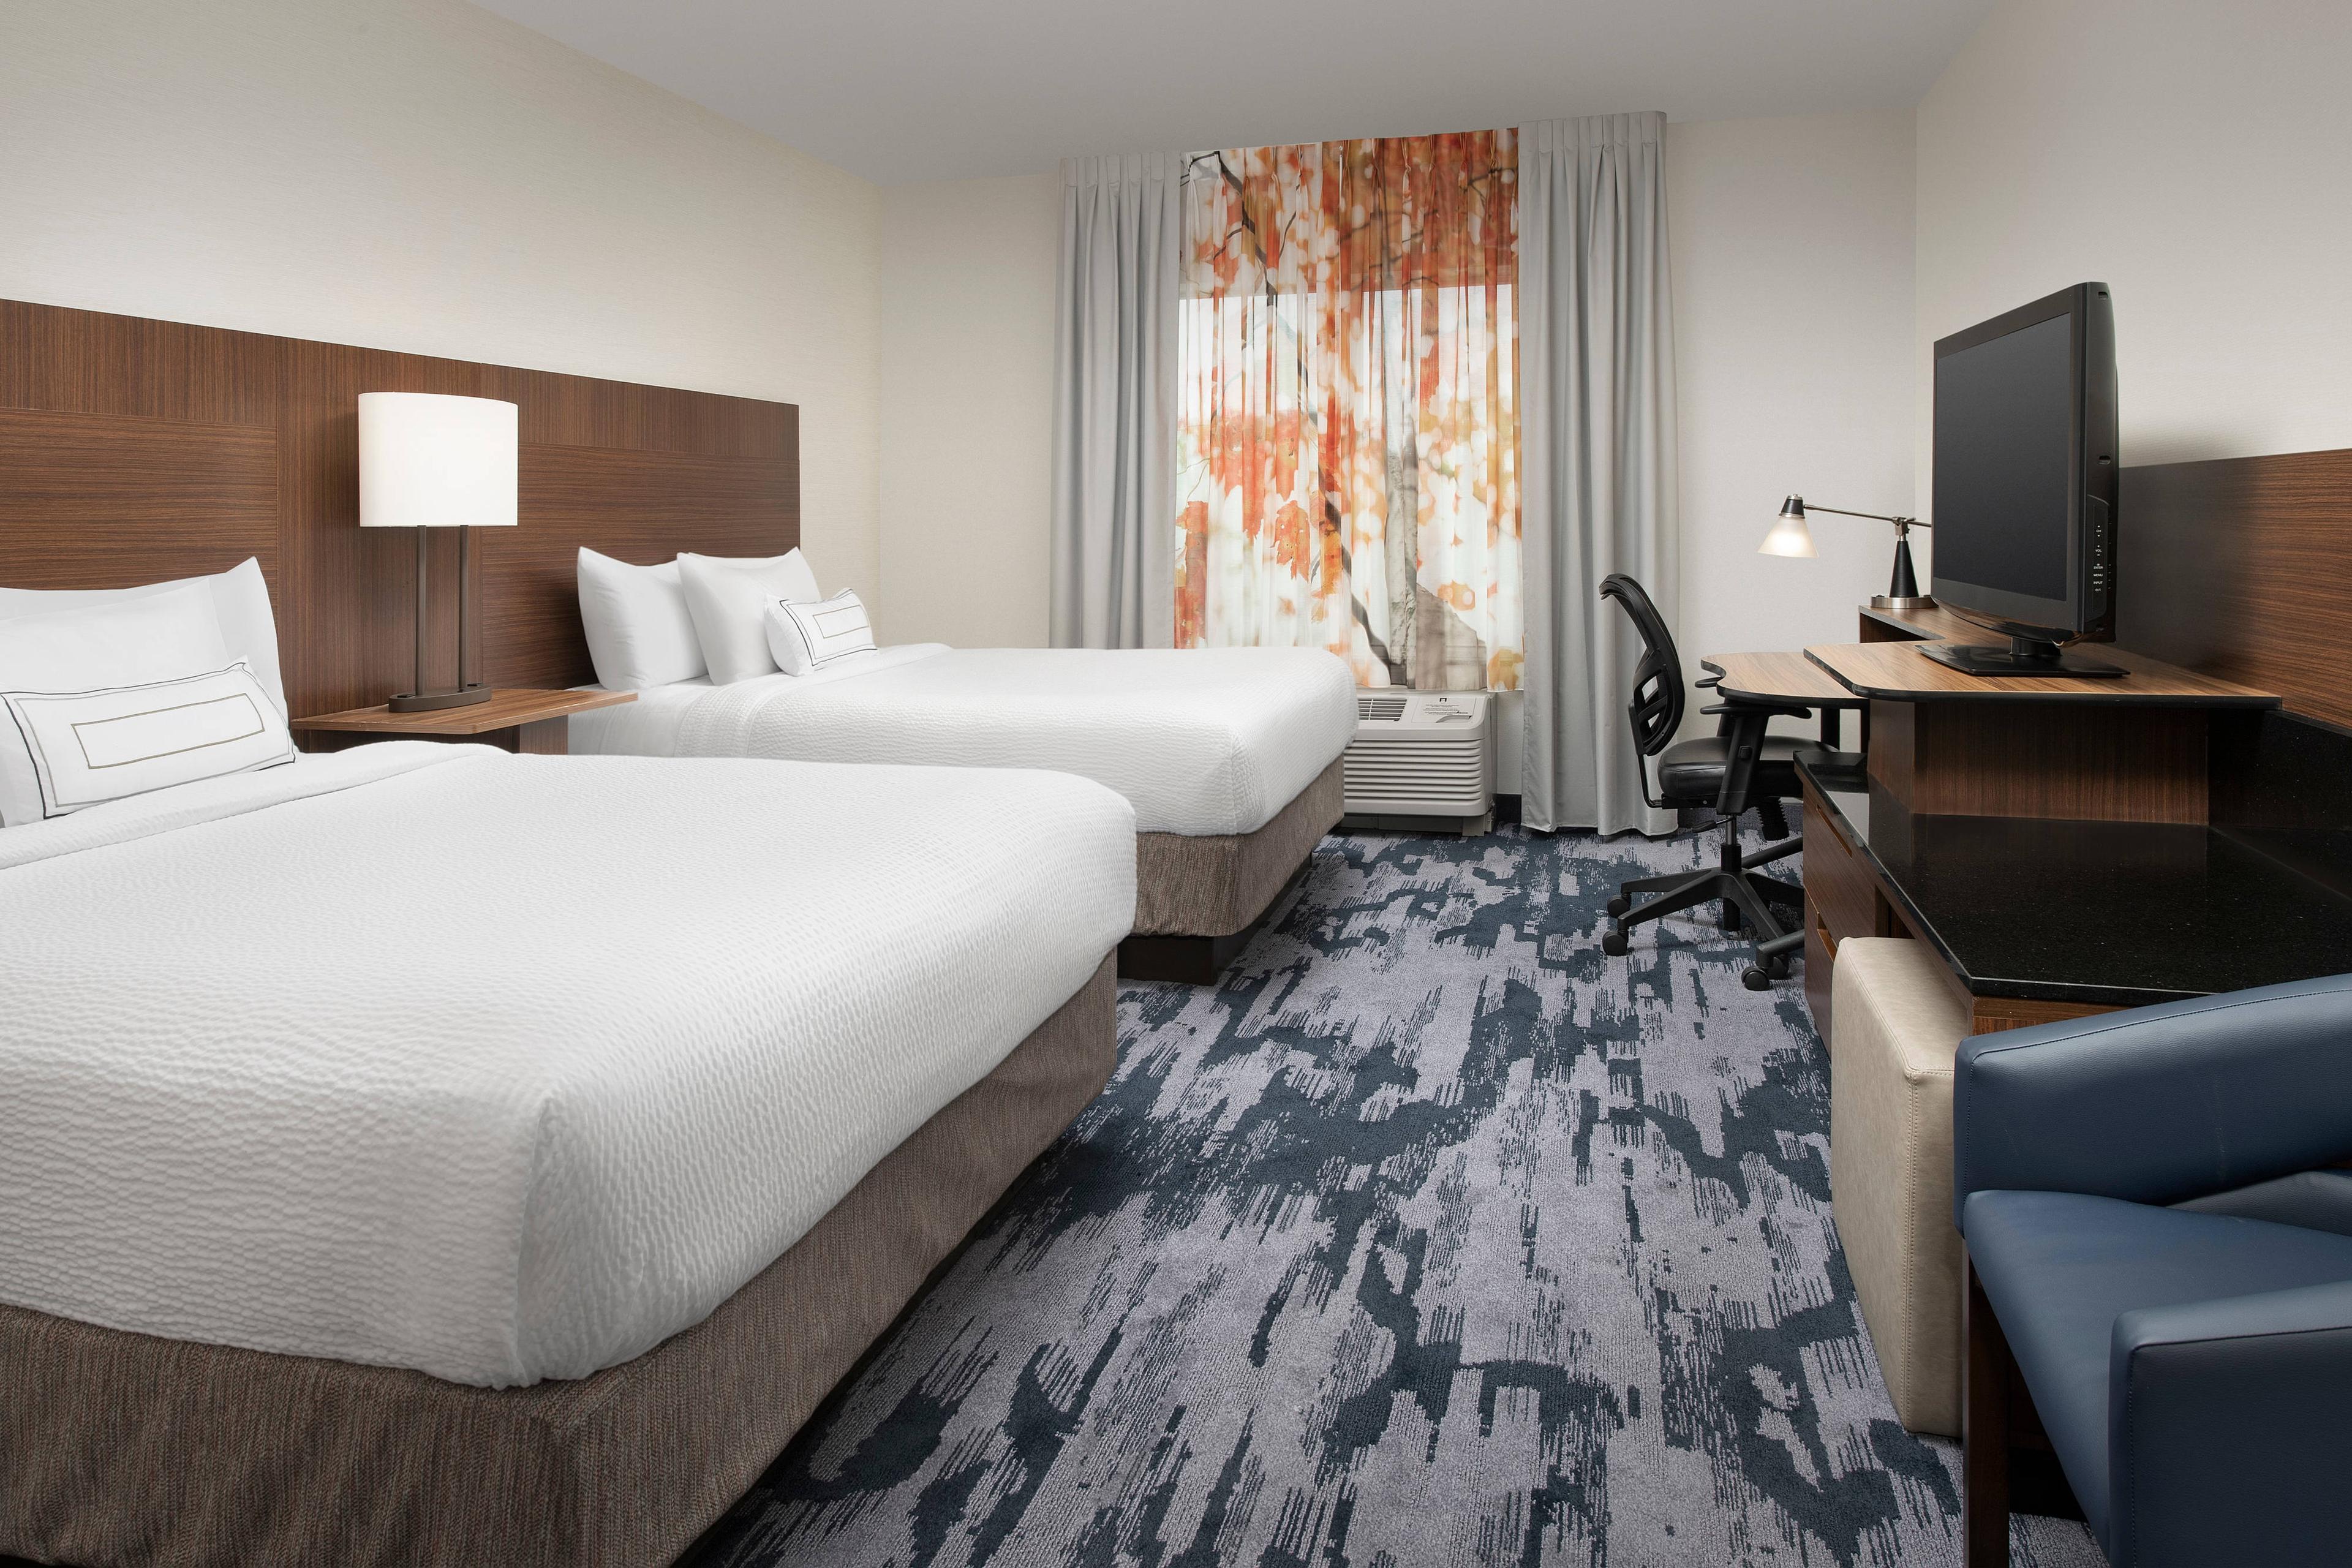 Our guest rooms with two luxurious queen-size beds and plenty of room to spread out make it easy when traveling with friends and family.